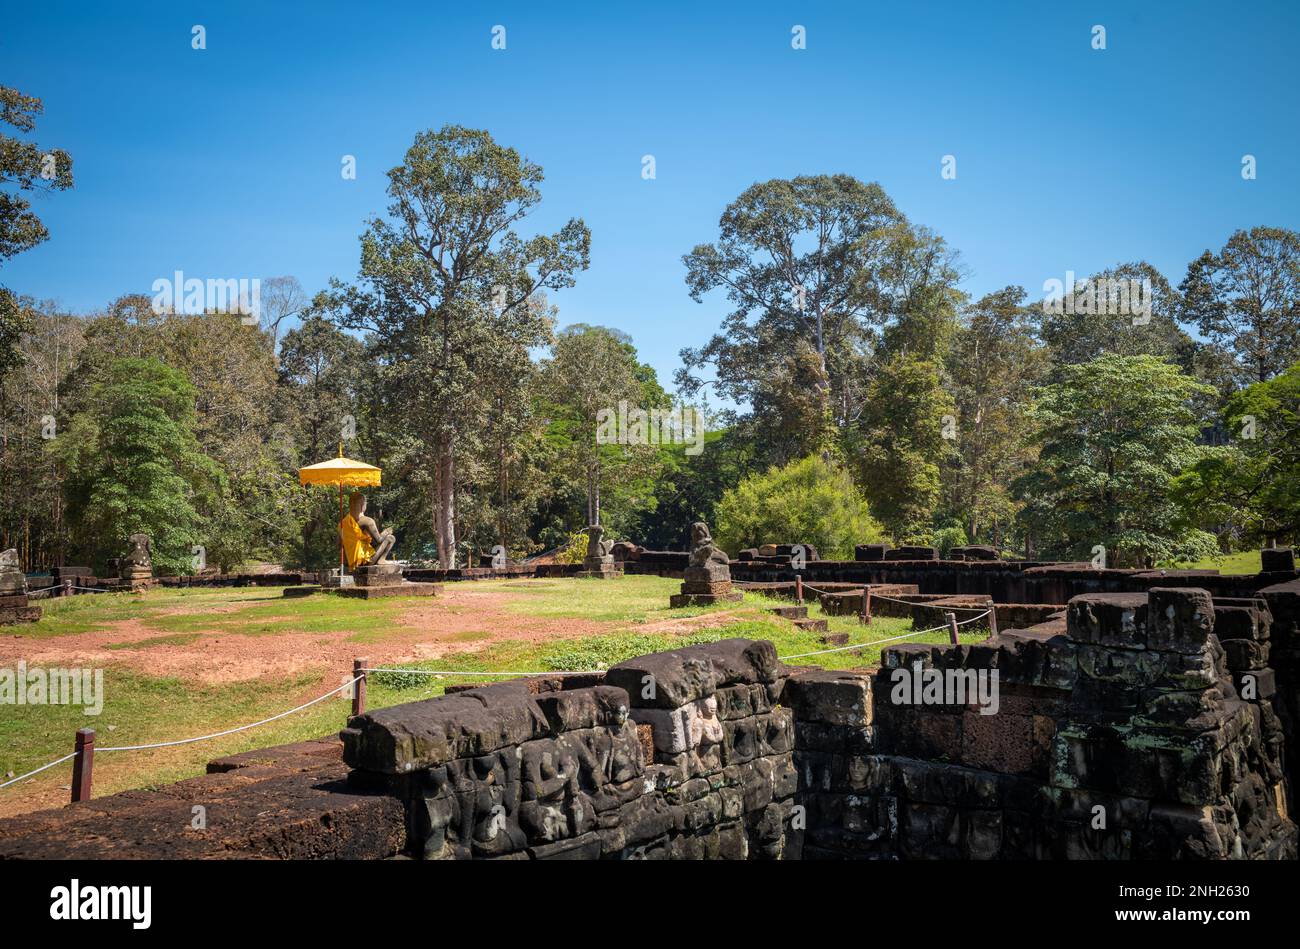 The buddhist statue of the Leper King on the Terrace of the Leper King at the Angkor complex in Cambodia. Stock Photo